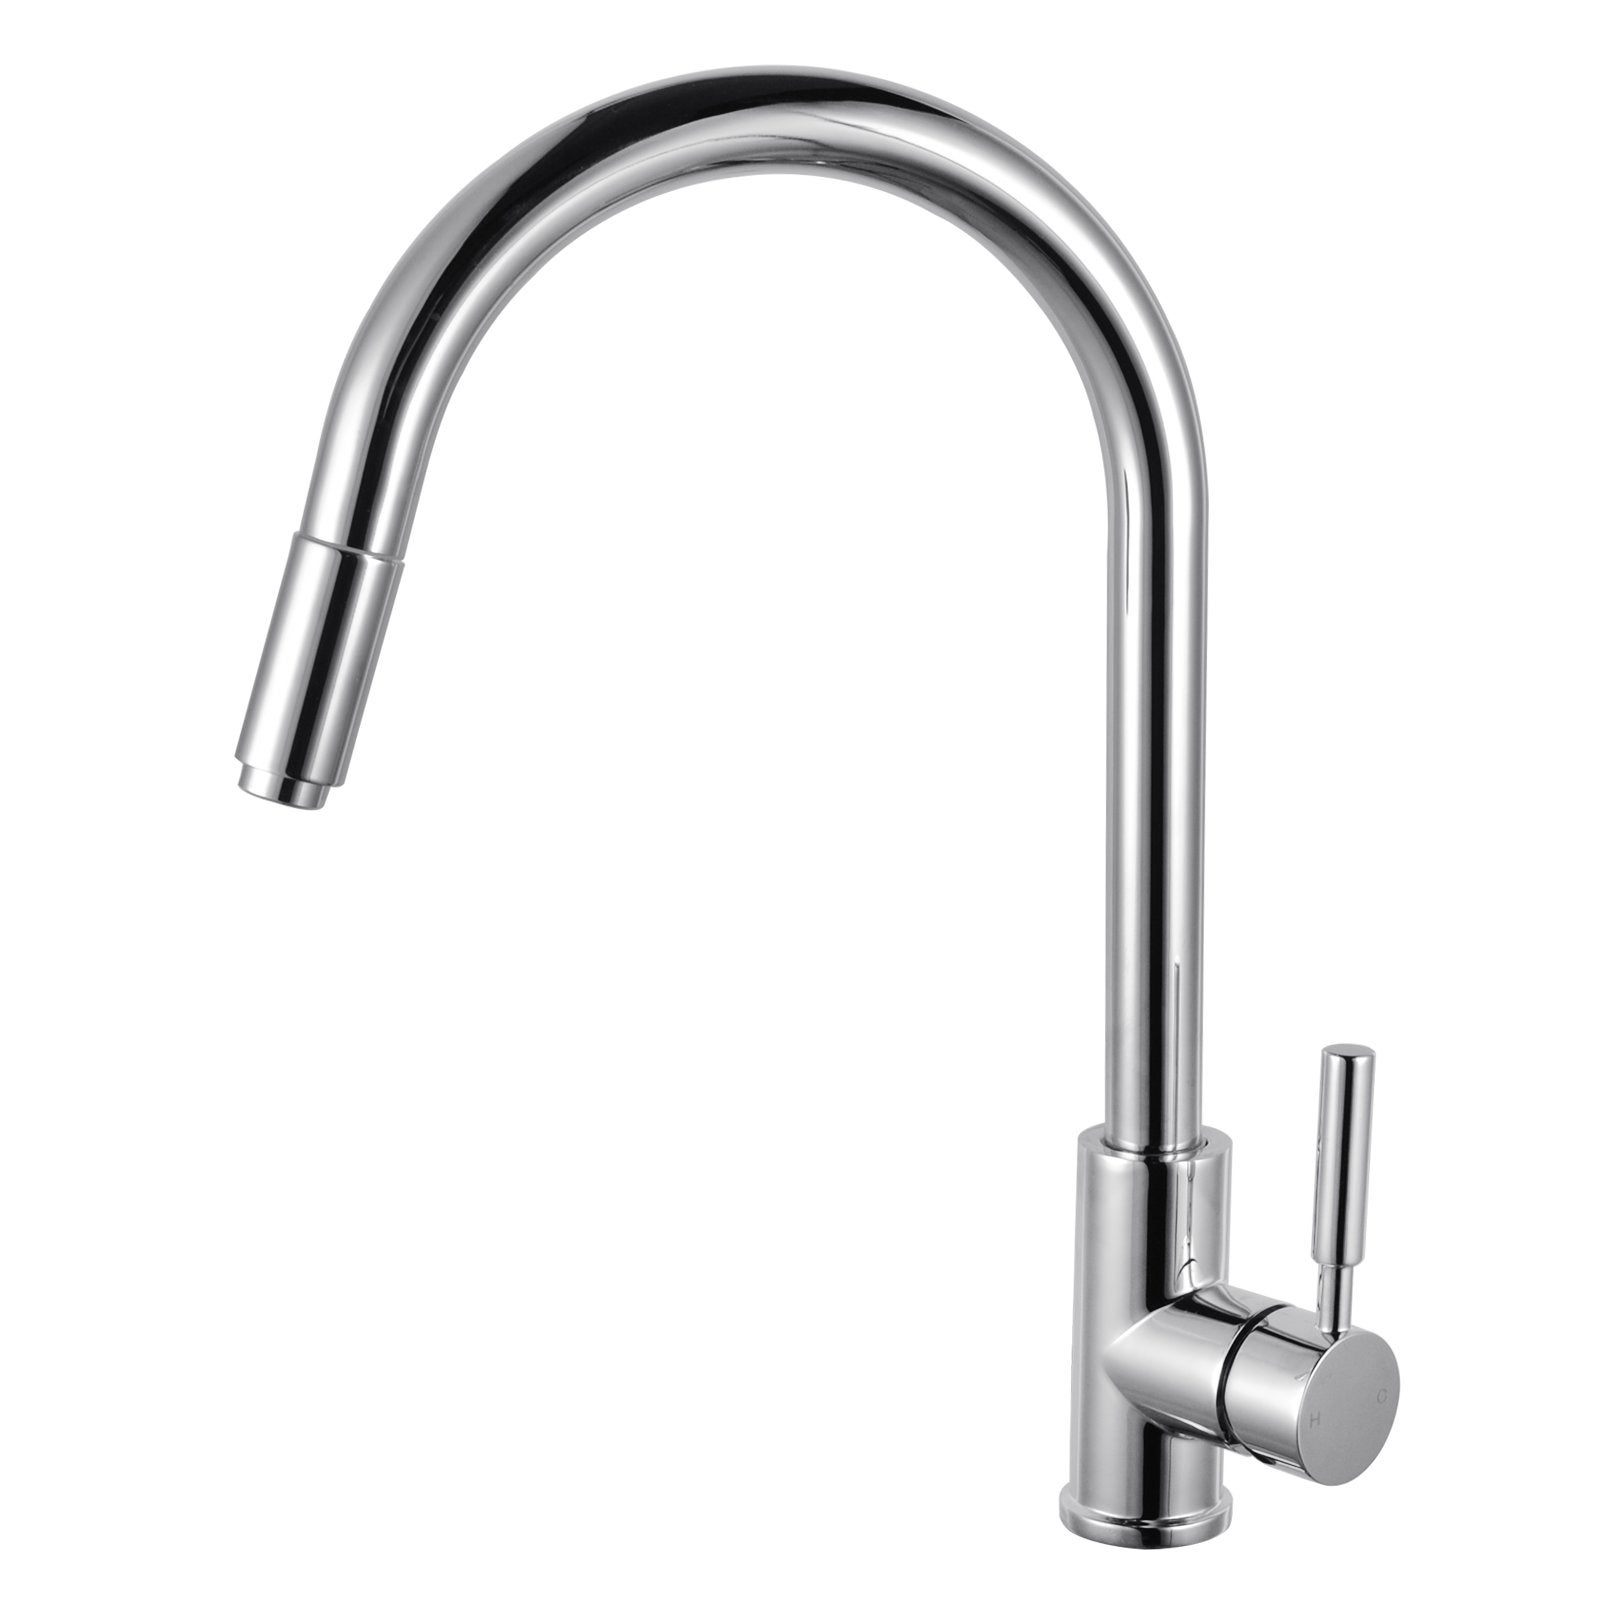 ACA Kitchen Tap Mixer Tap Swivel Pull Out Spout Solid Brass Basin Faucet Vanity Sink Watermark WELS